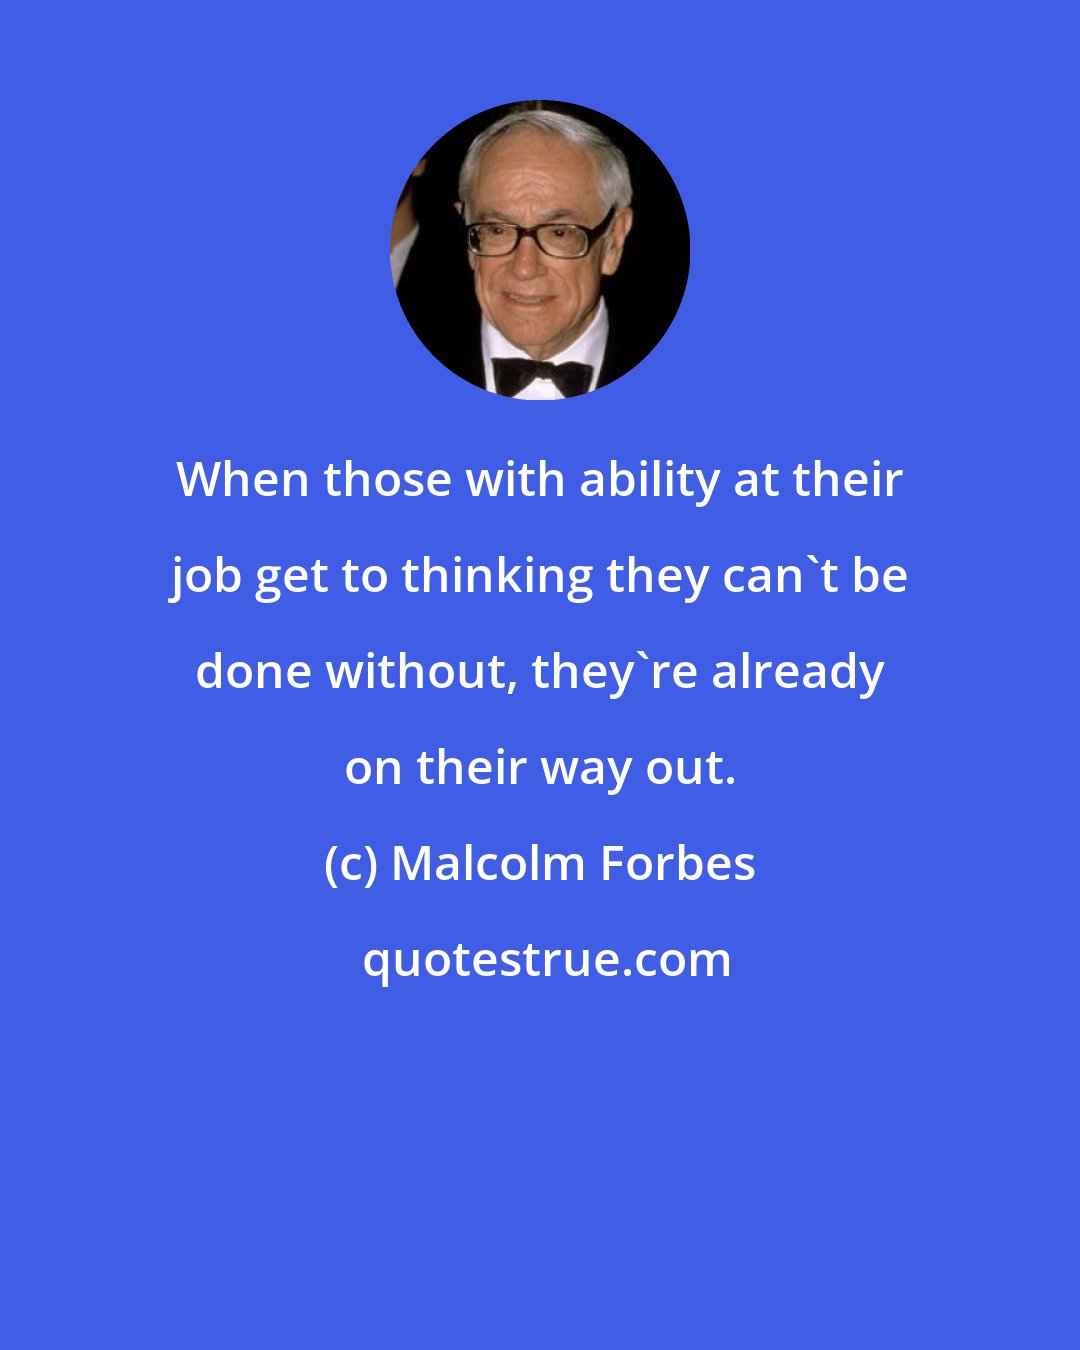 Malcolm Forbes: When those with ability at their job get to thinking they can't be done without, they're already on their way out.